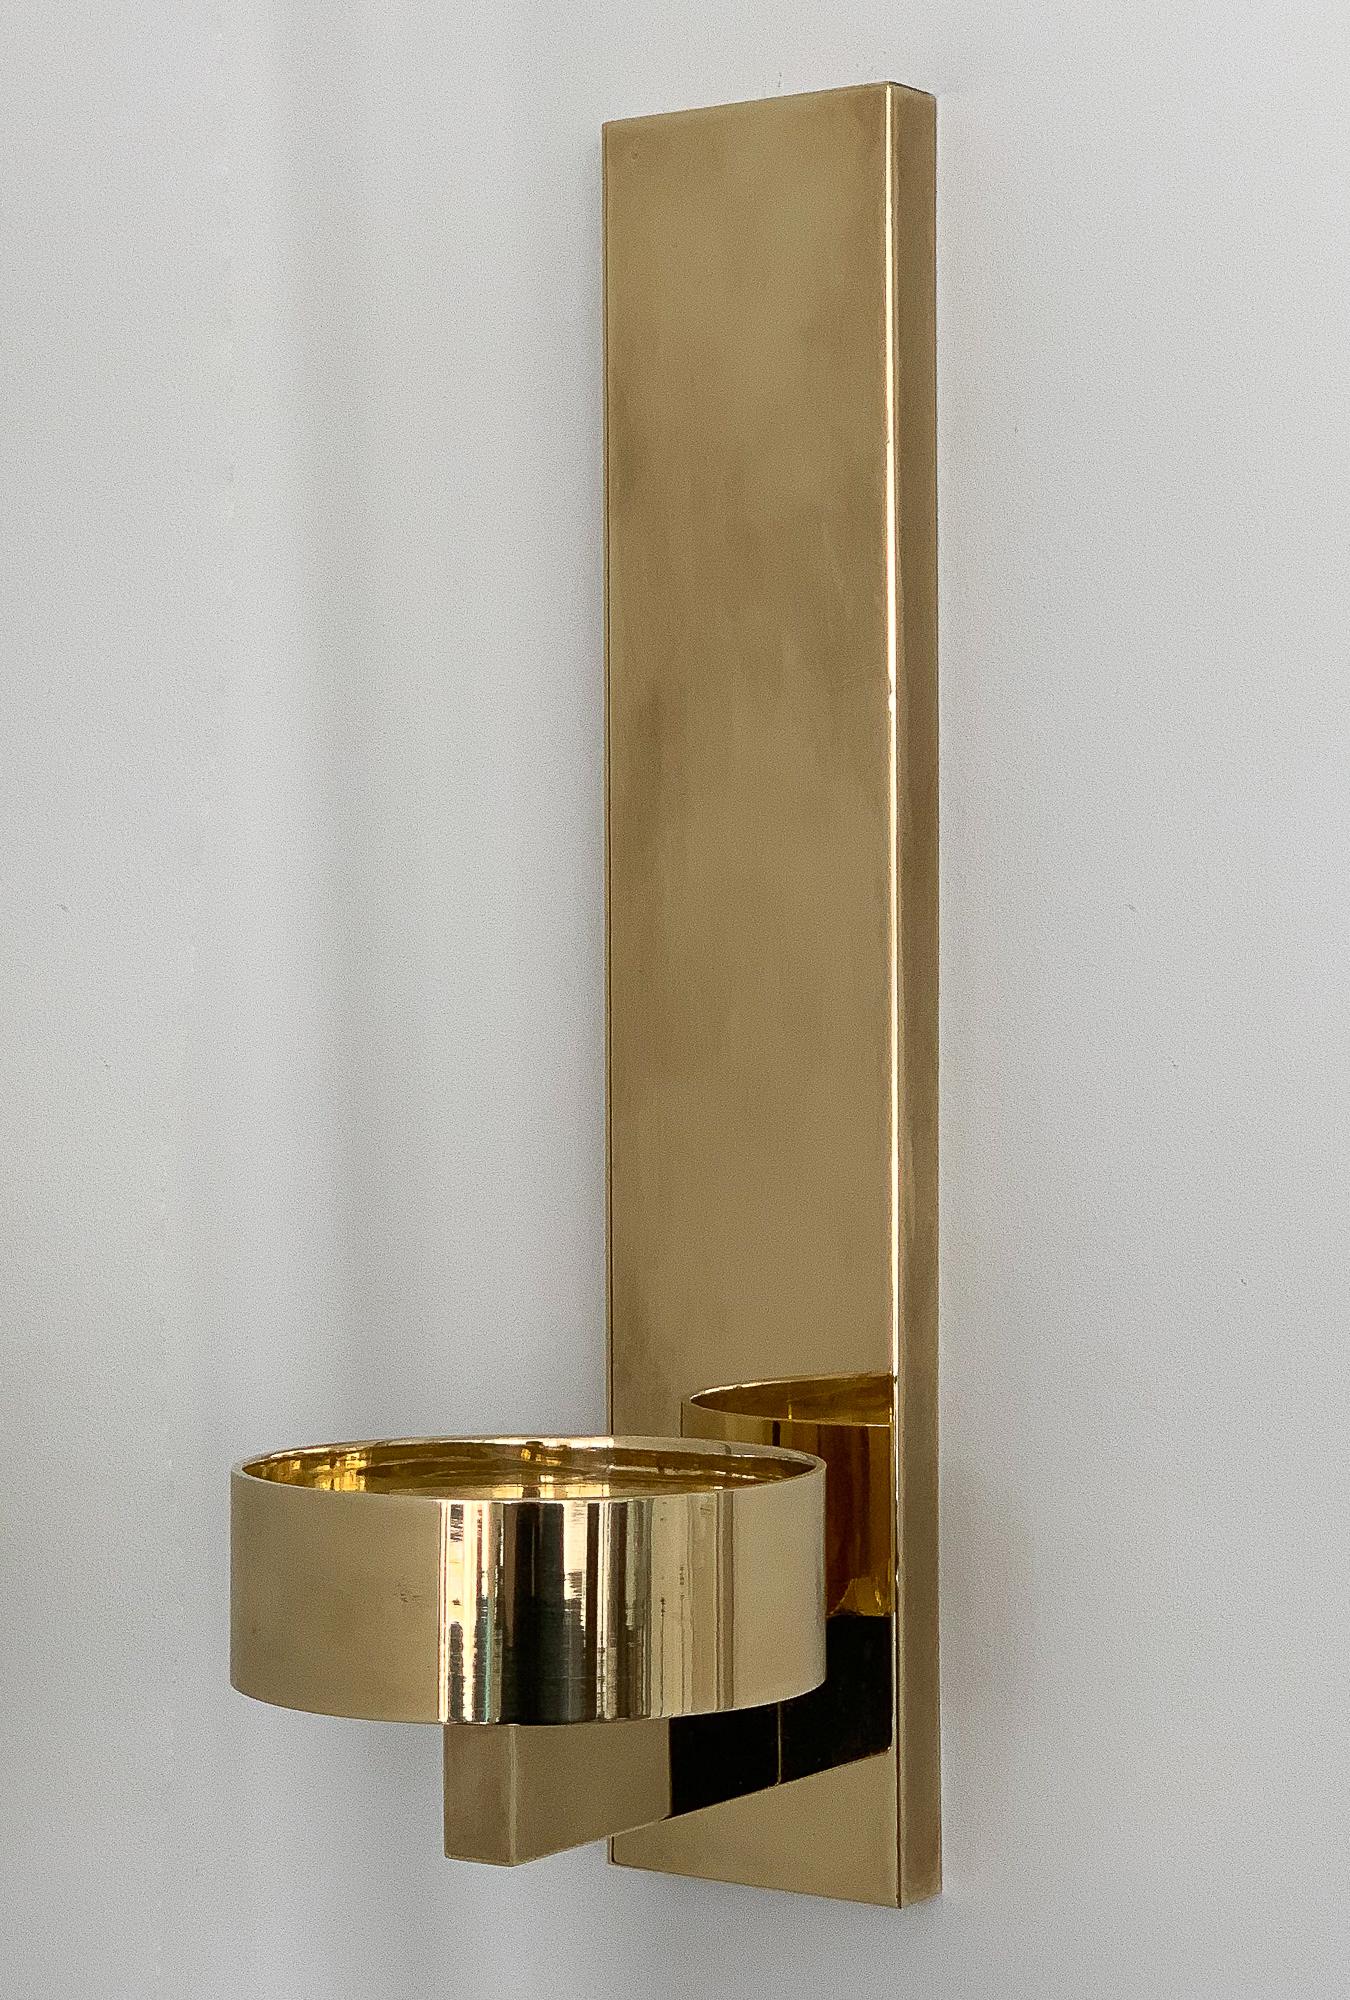 Late 20th Century Pair of Chapman Brass and Glass Candle Wall Sconces